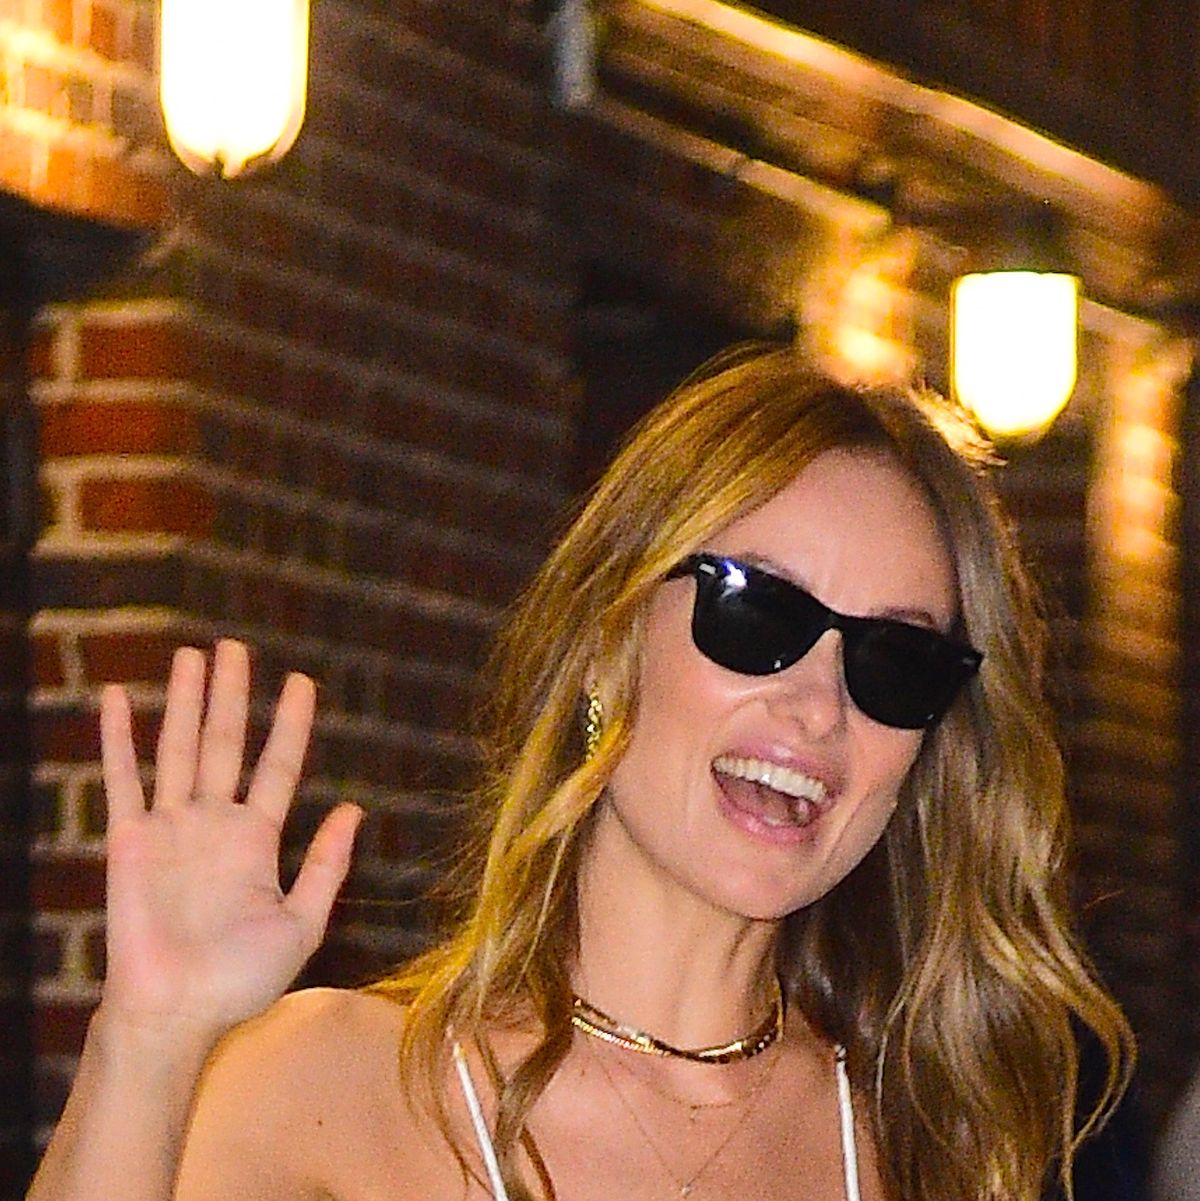 https://hips.hearstapps.com/hmg-prod/images/olivia-wilde-is-seen-leaving-at-the-late-show-with-stephen-news-photo-1663943822.jpg?crop=0.548xw:0.448xh;0.253xw,0.0955xh&resize=1200:*